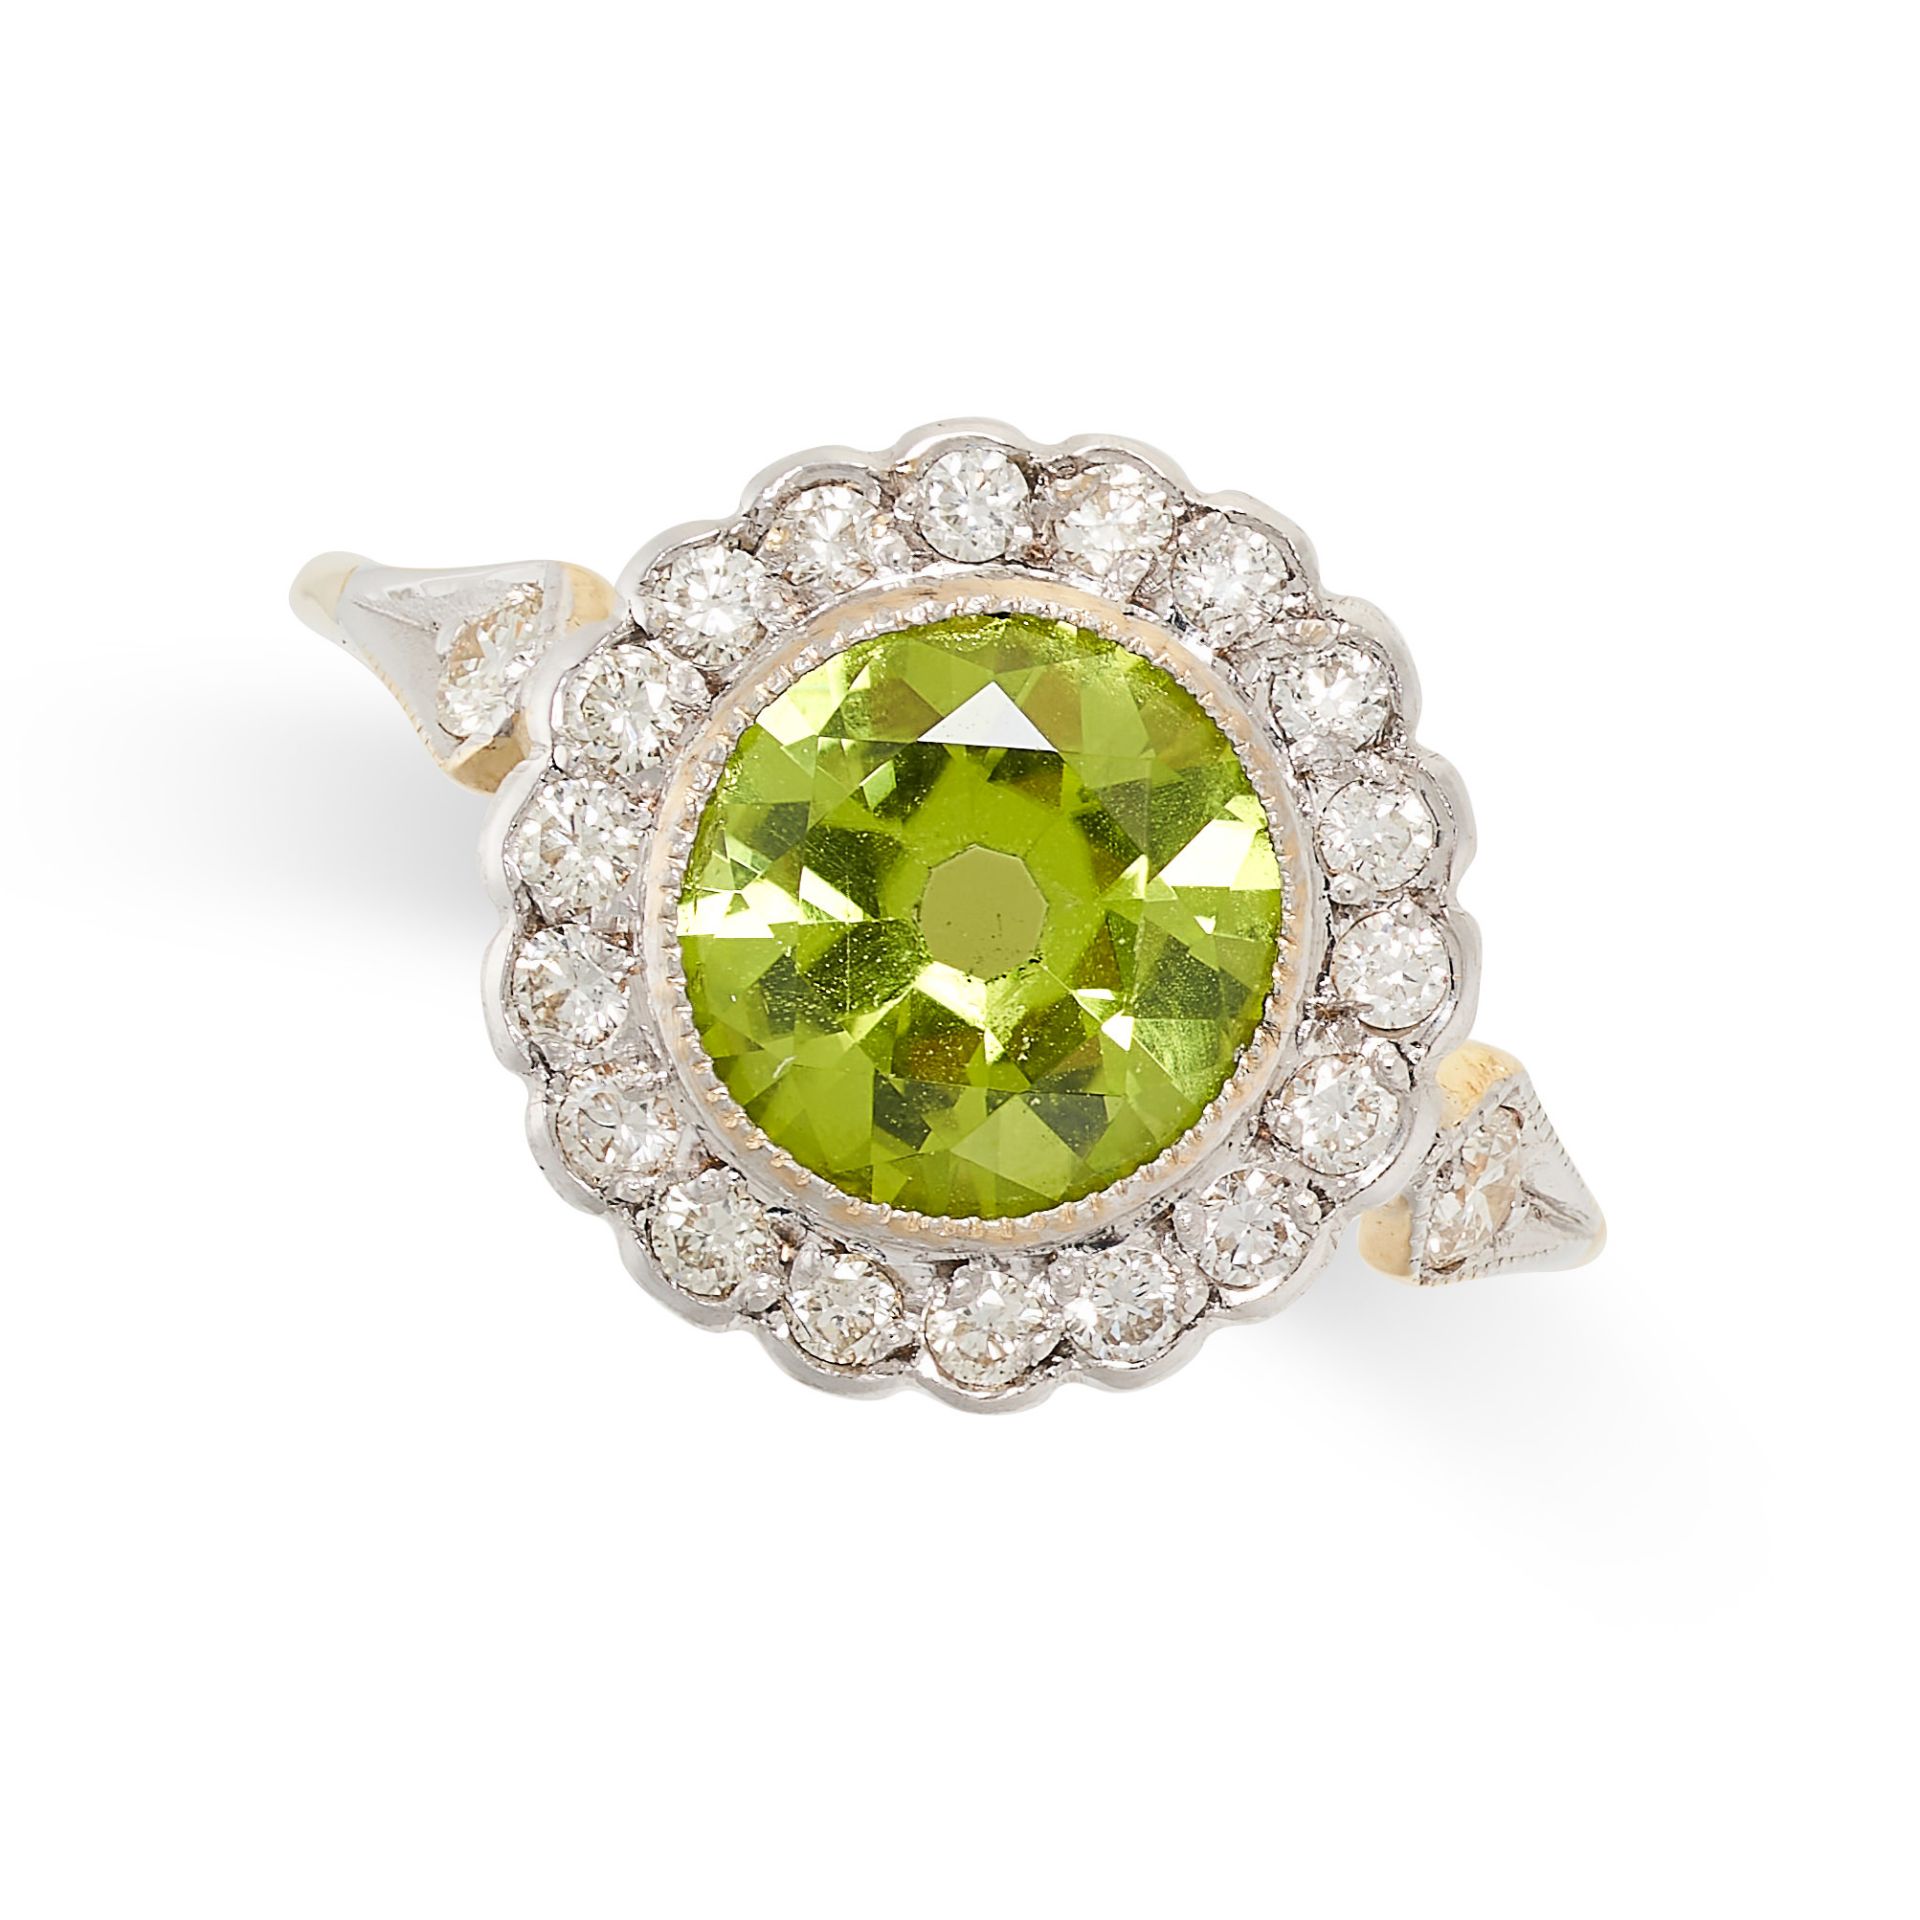 A PERIDOT AND DIAMOND RING set with a round cut peridot of 0.80 carats in a cluster of round